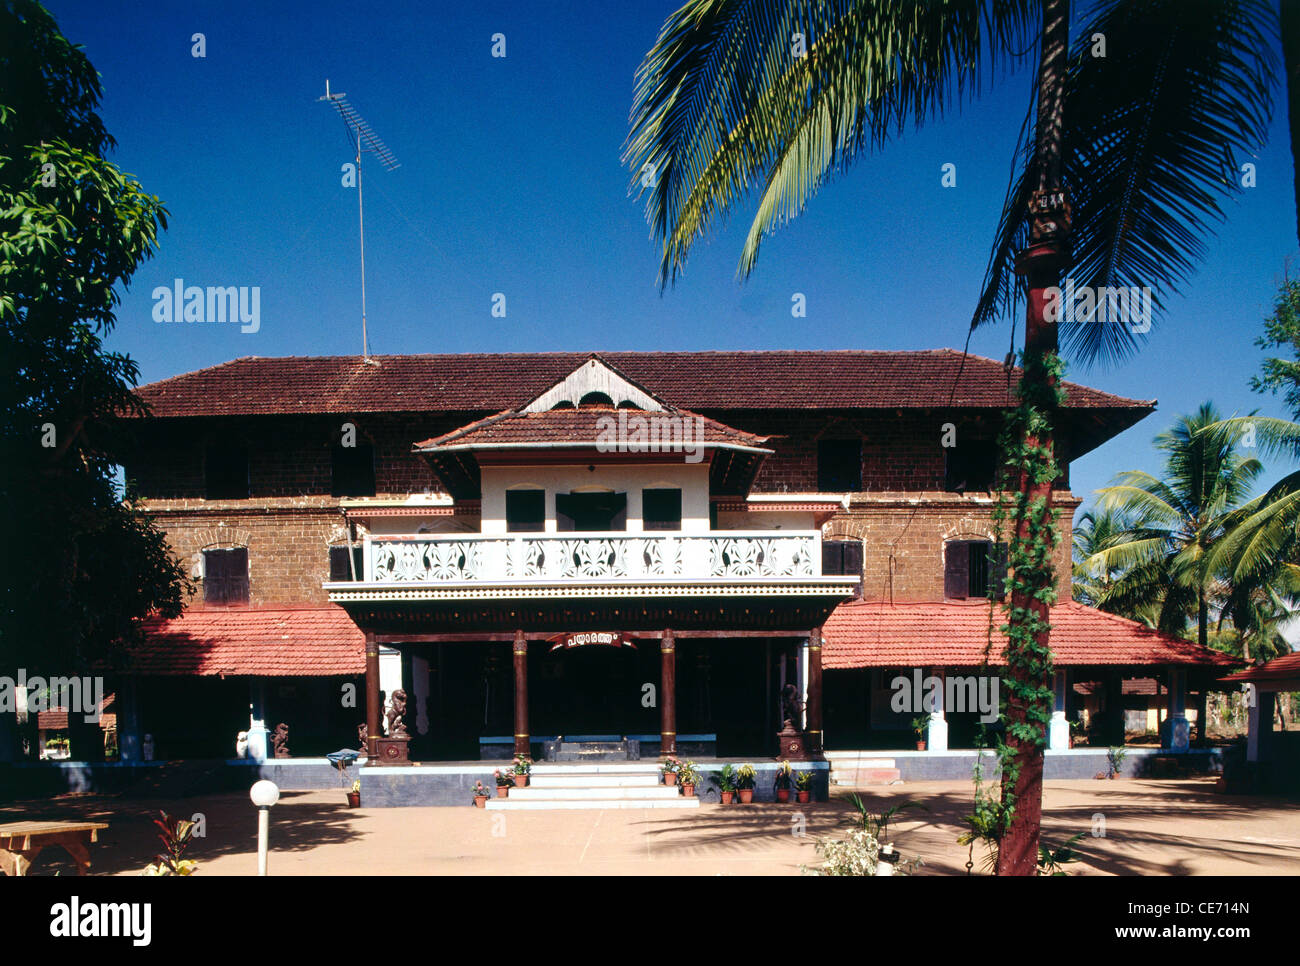 AAD 82406 : old indian house bunglow palm trees palghat kerala ...